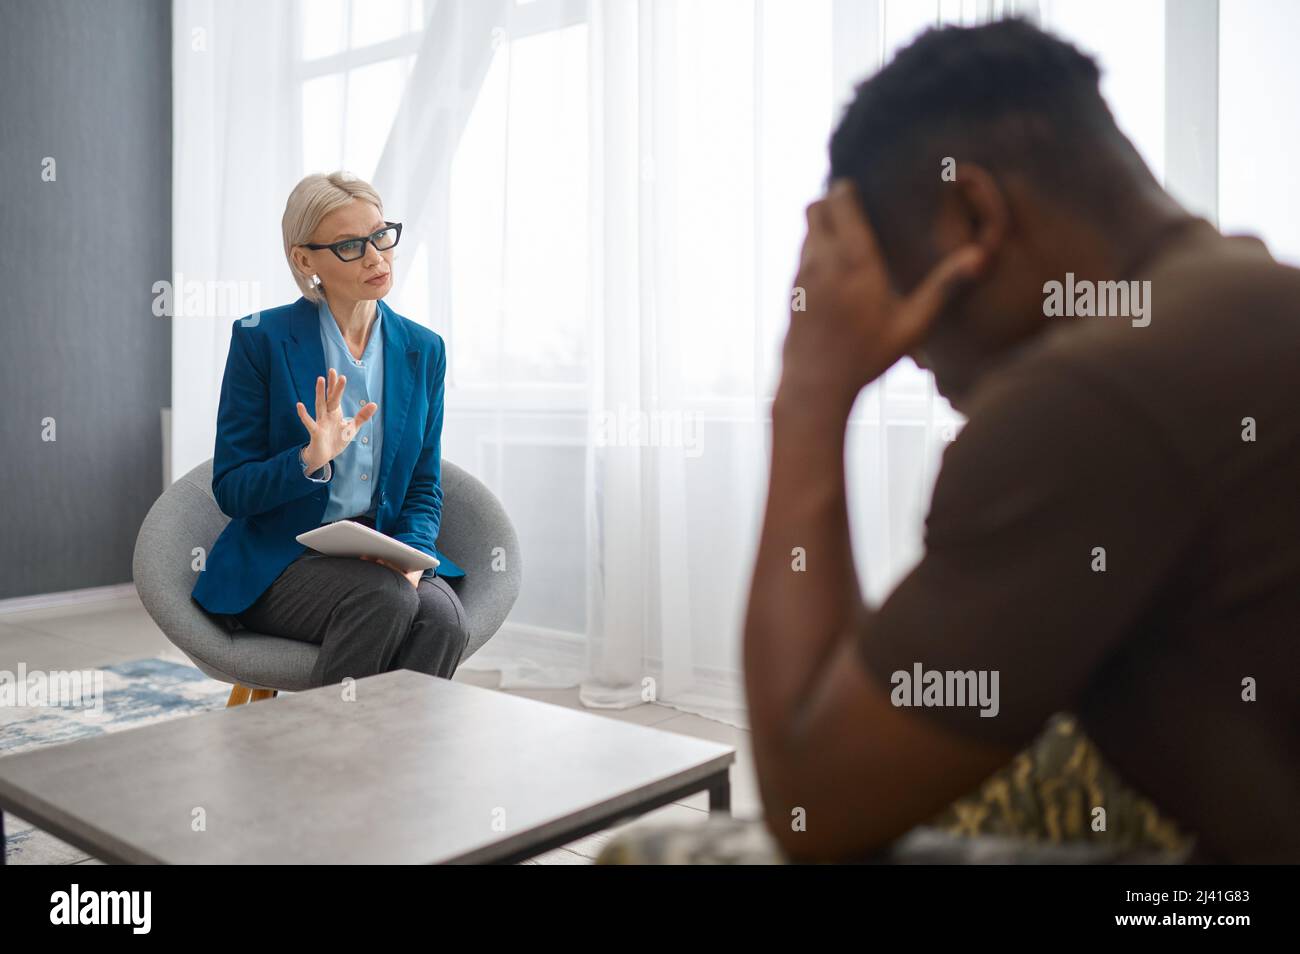 Frustrated military patient talking with doctor psychologist Stock Photo